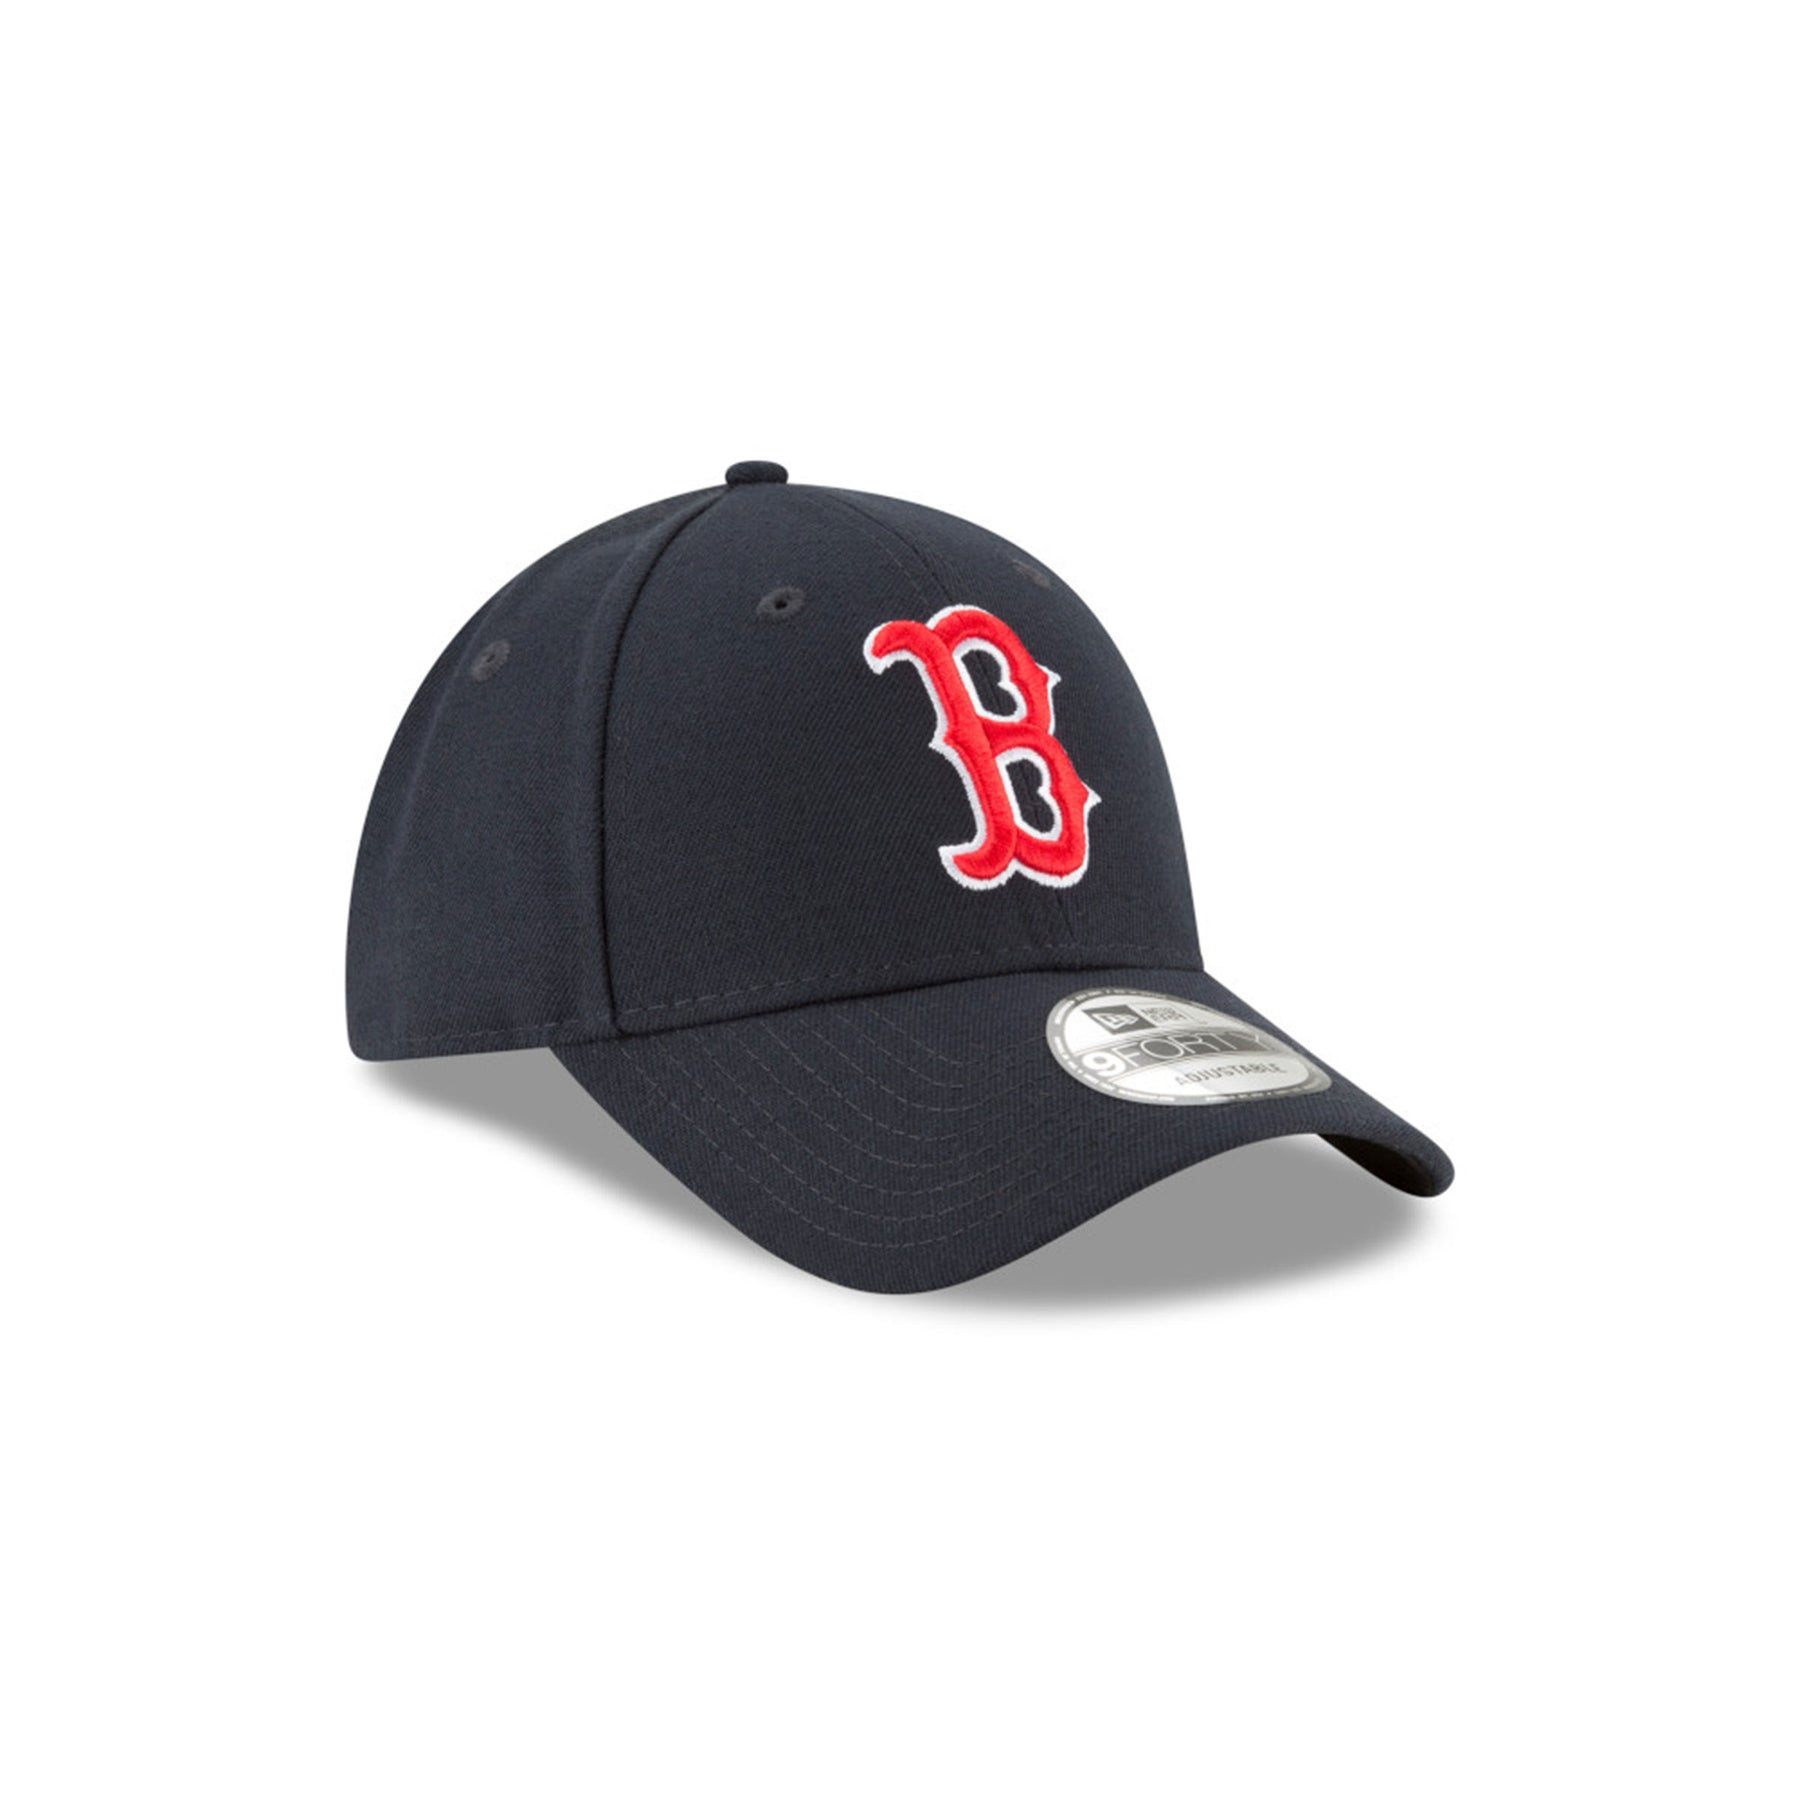 MLB Boston Red Sox 9Forty Cap